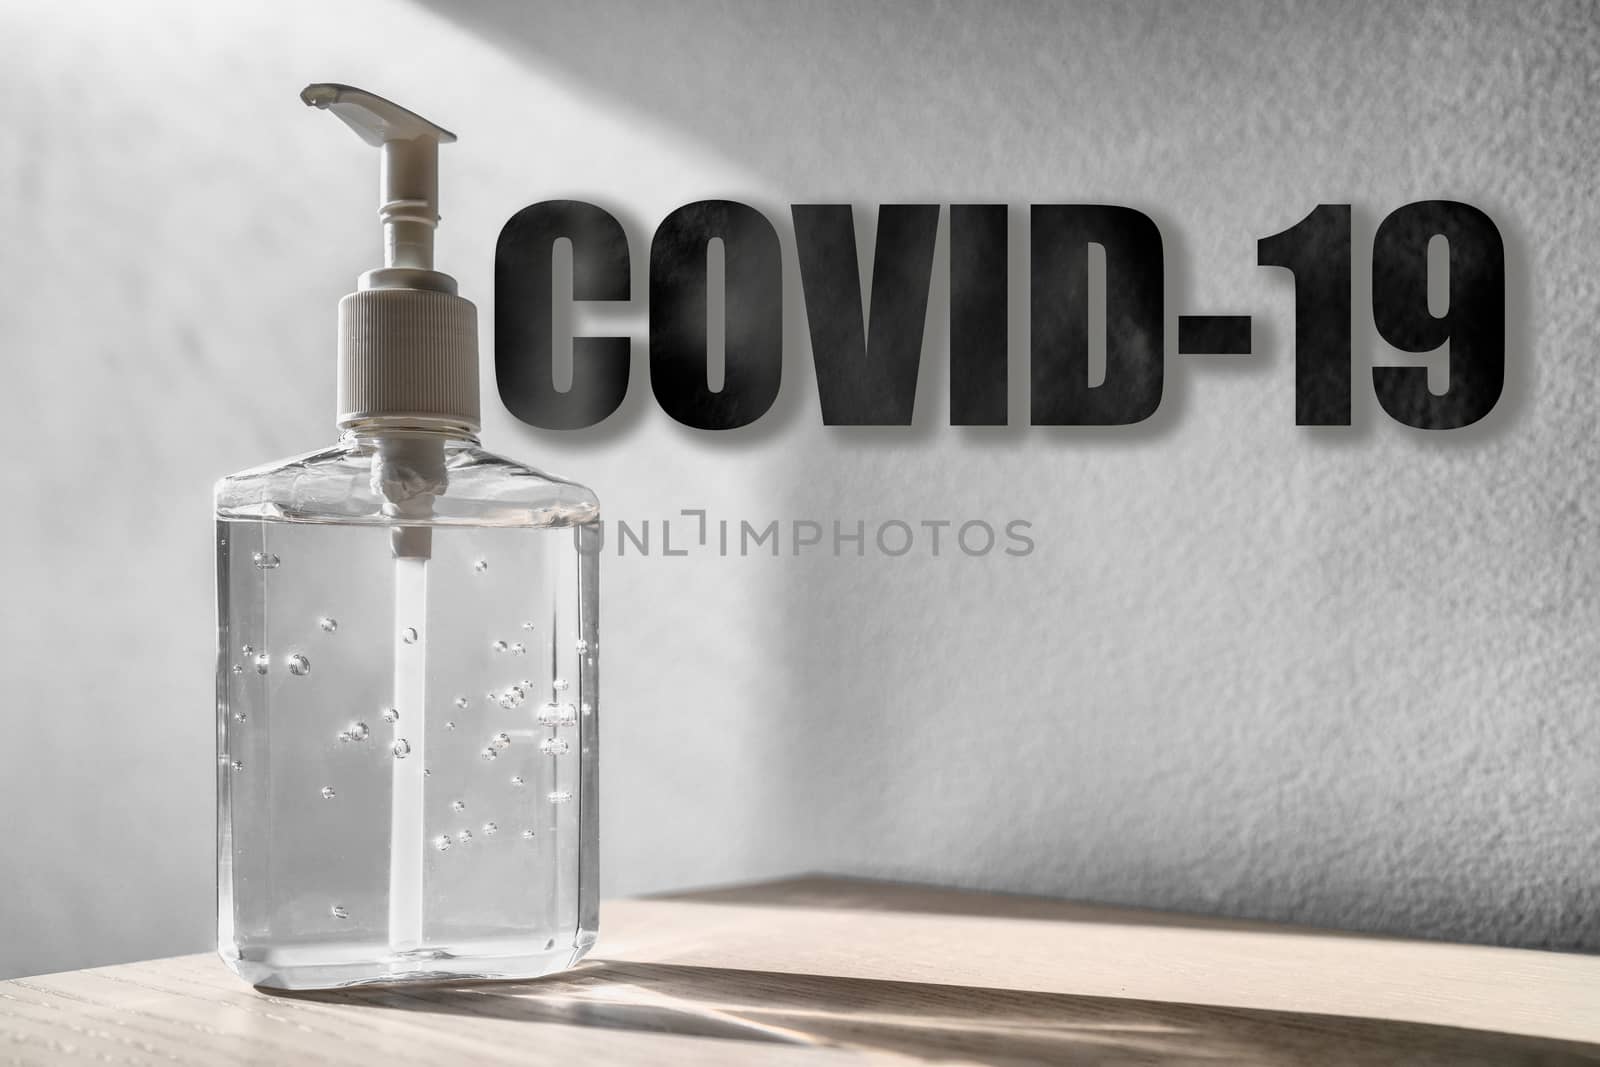 Coronavirus COVID-19 text title over hand sanitizer bottle background with texture.